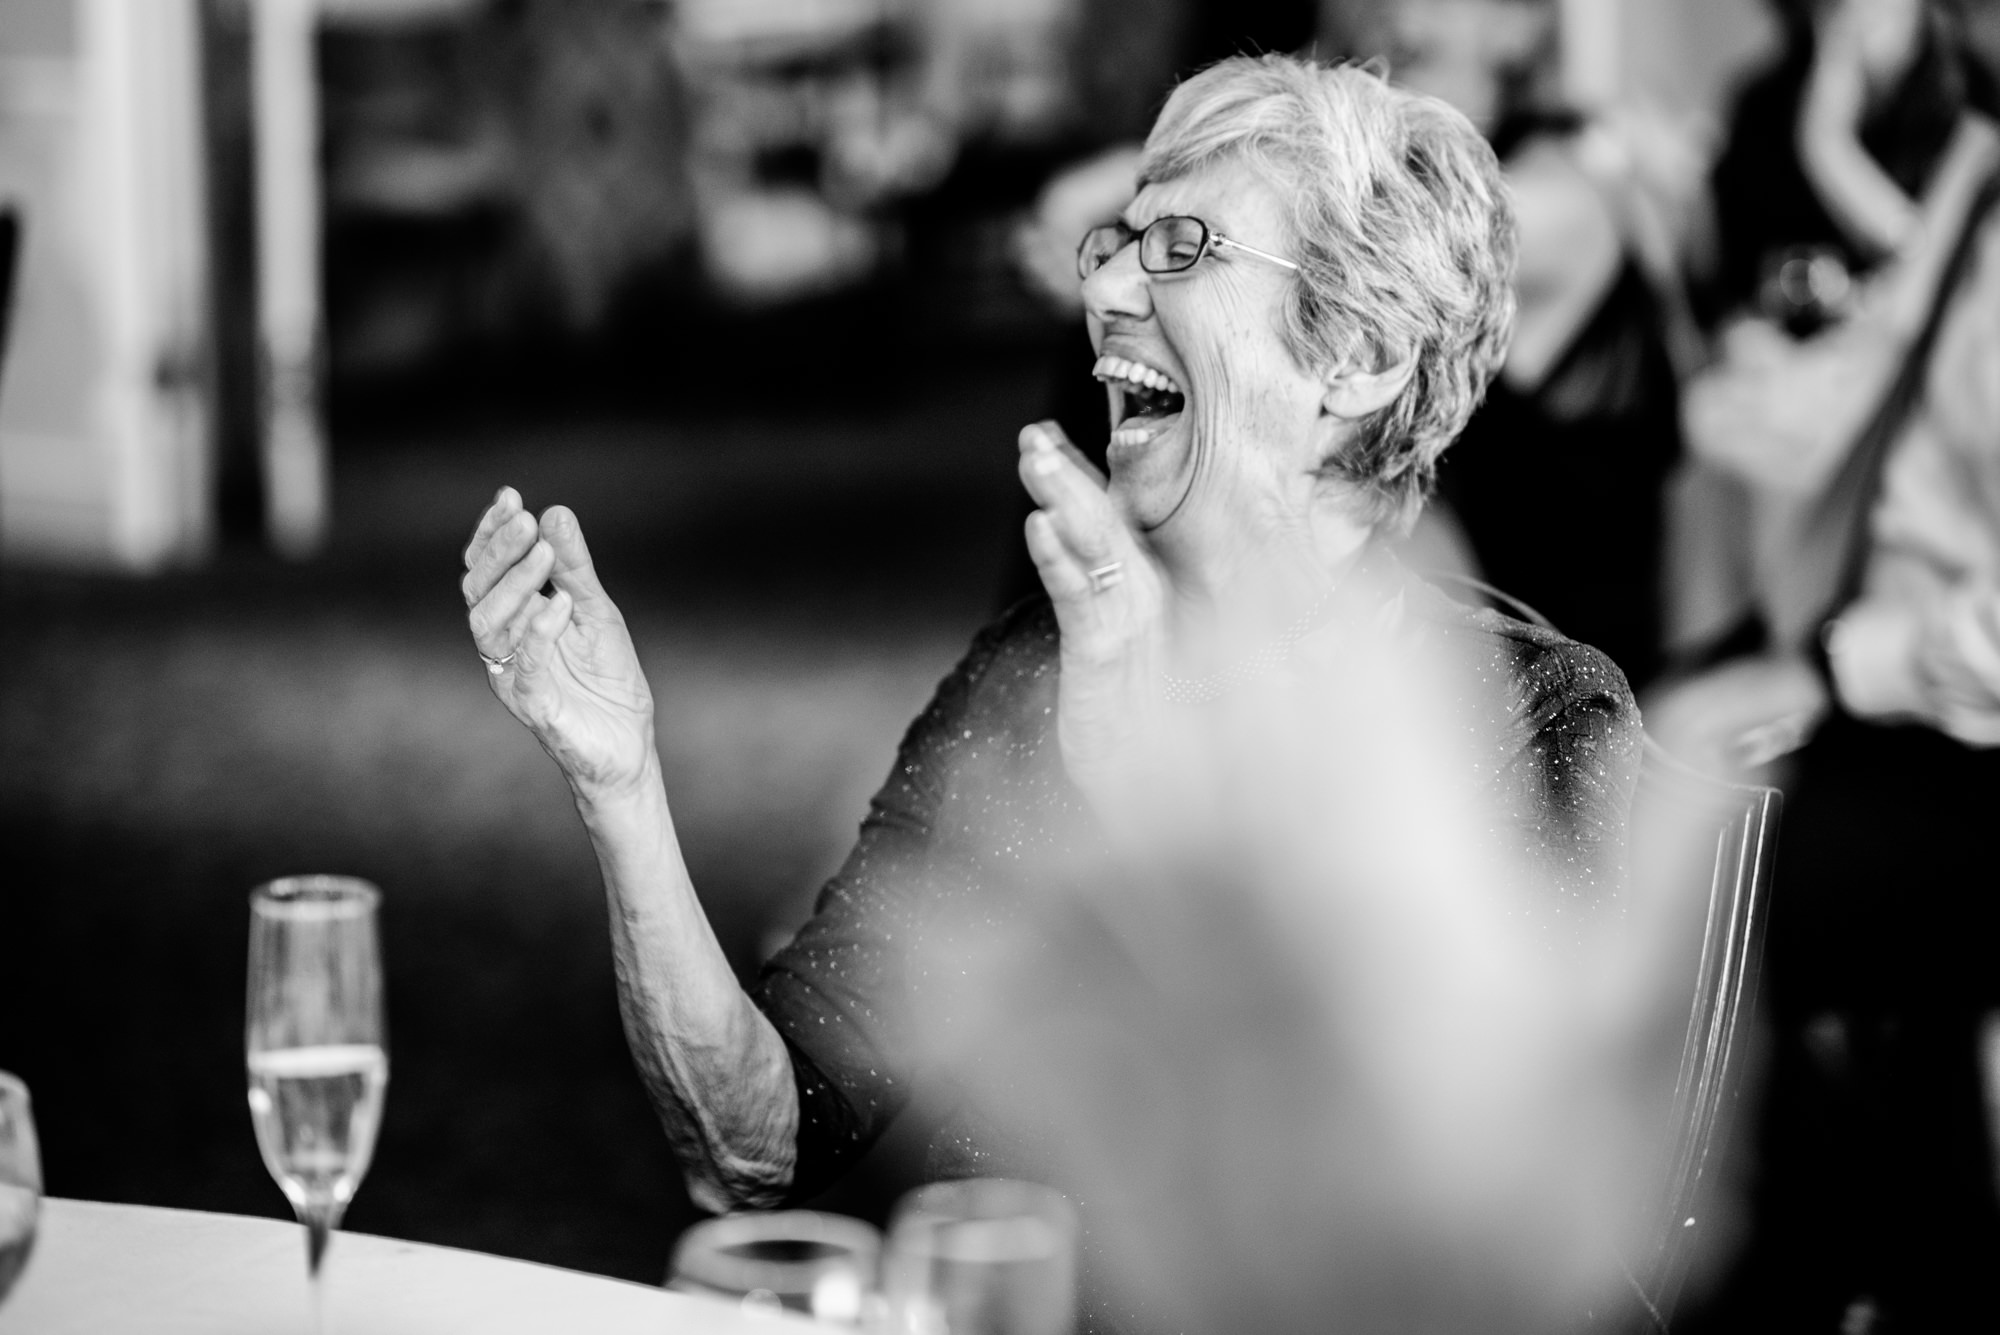 Joelle's mom also laughs at the funny performance at Joelle and Ryan's wedding reception at the Seattle Tennis Club, Summer 2016. Photo by Seattle Wedding Photographers Jennifer Tai Photo Artistry.